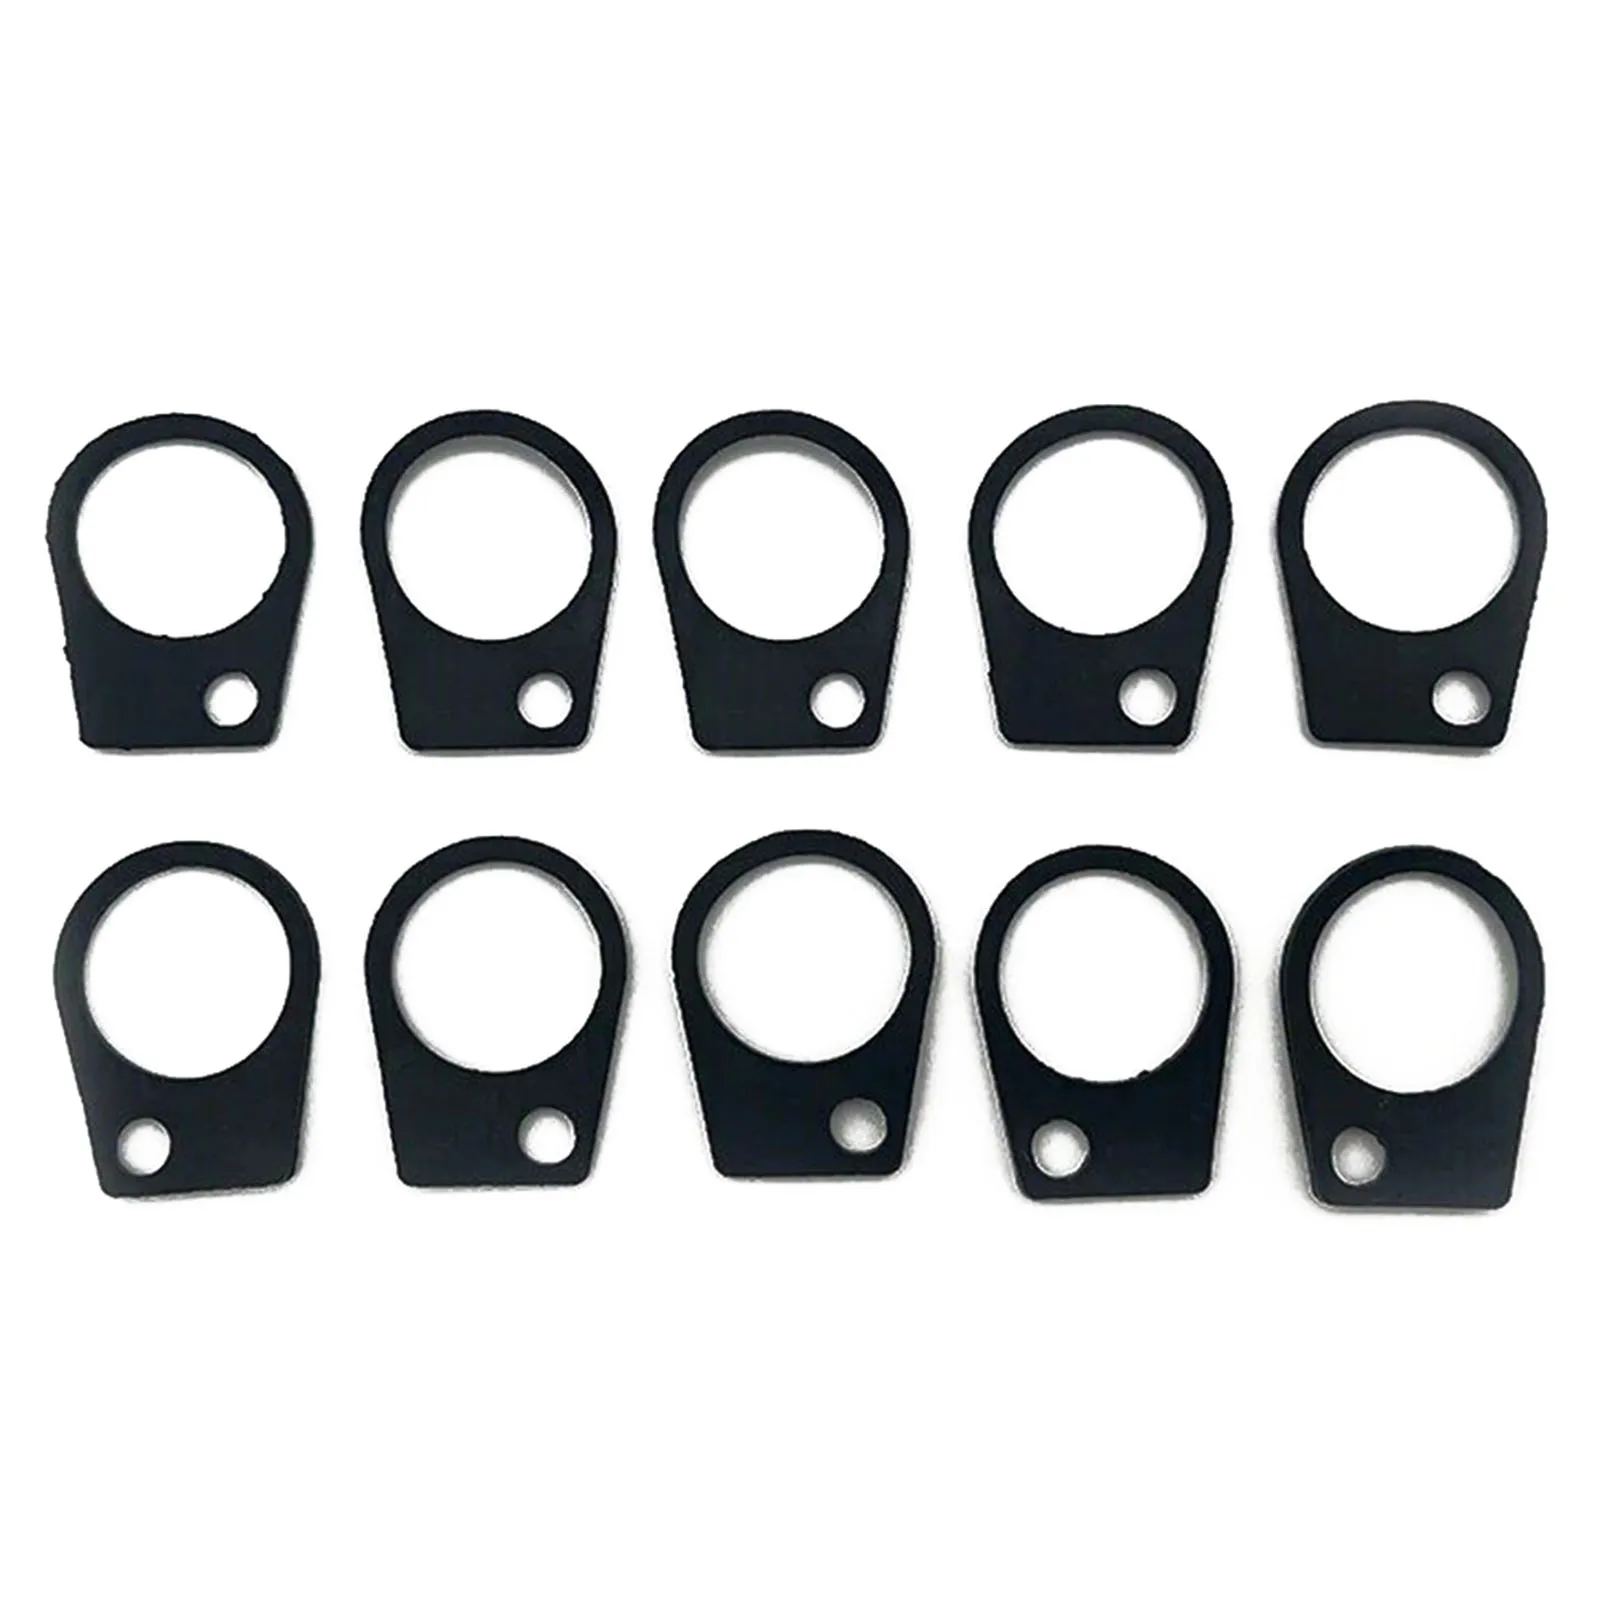 10pcs Rubber Gasket Of Air Filter For Gasoline Chainsaw 45cc 52cc 58cc Garden Power Tool Accessories Replacement